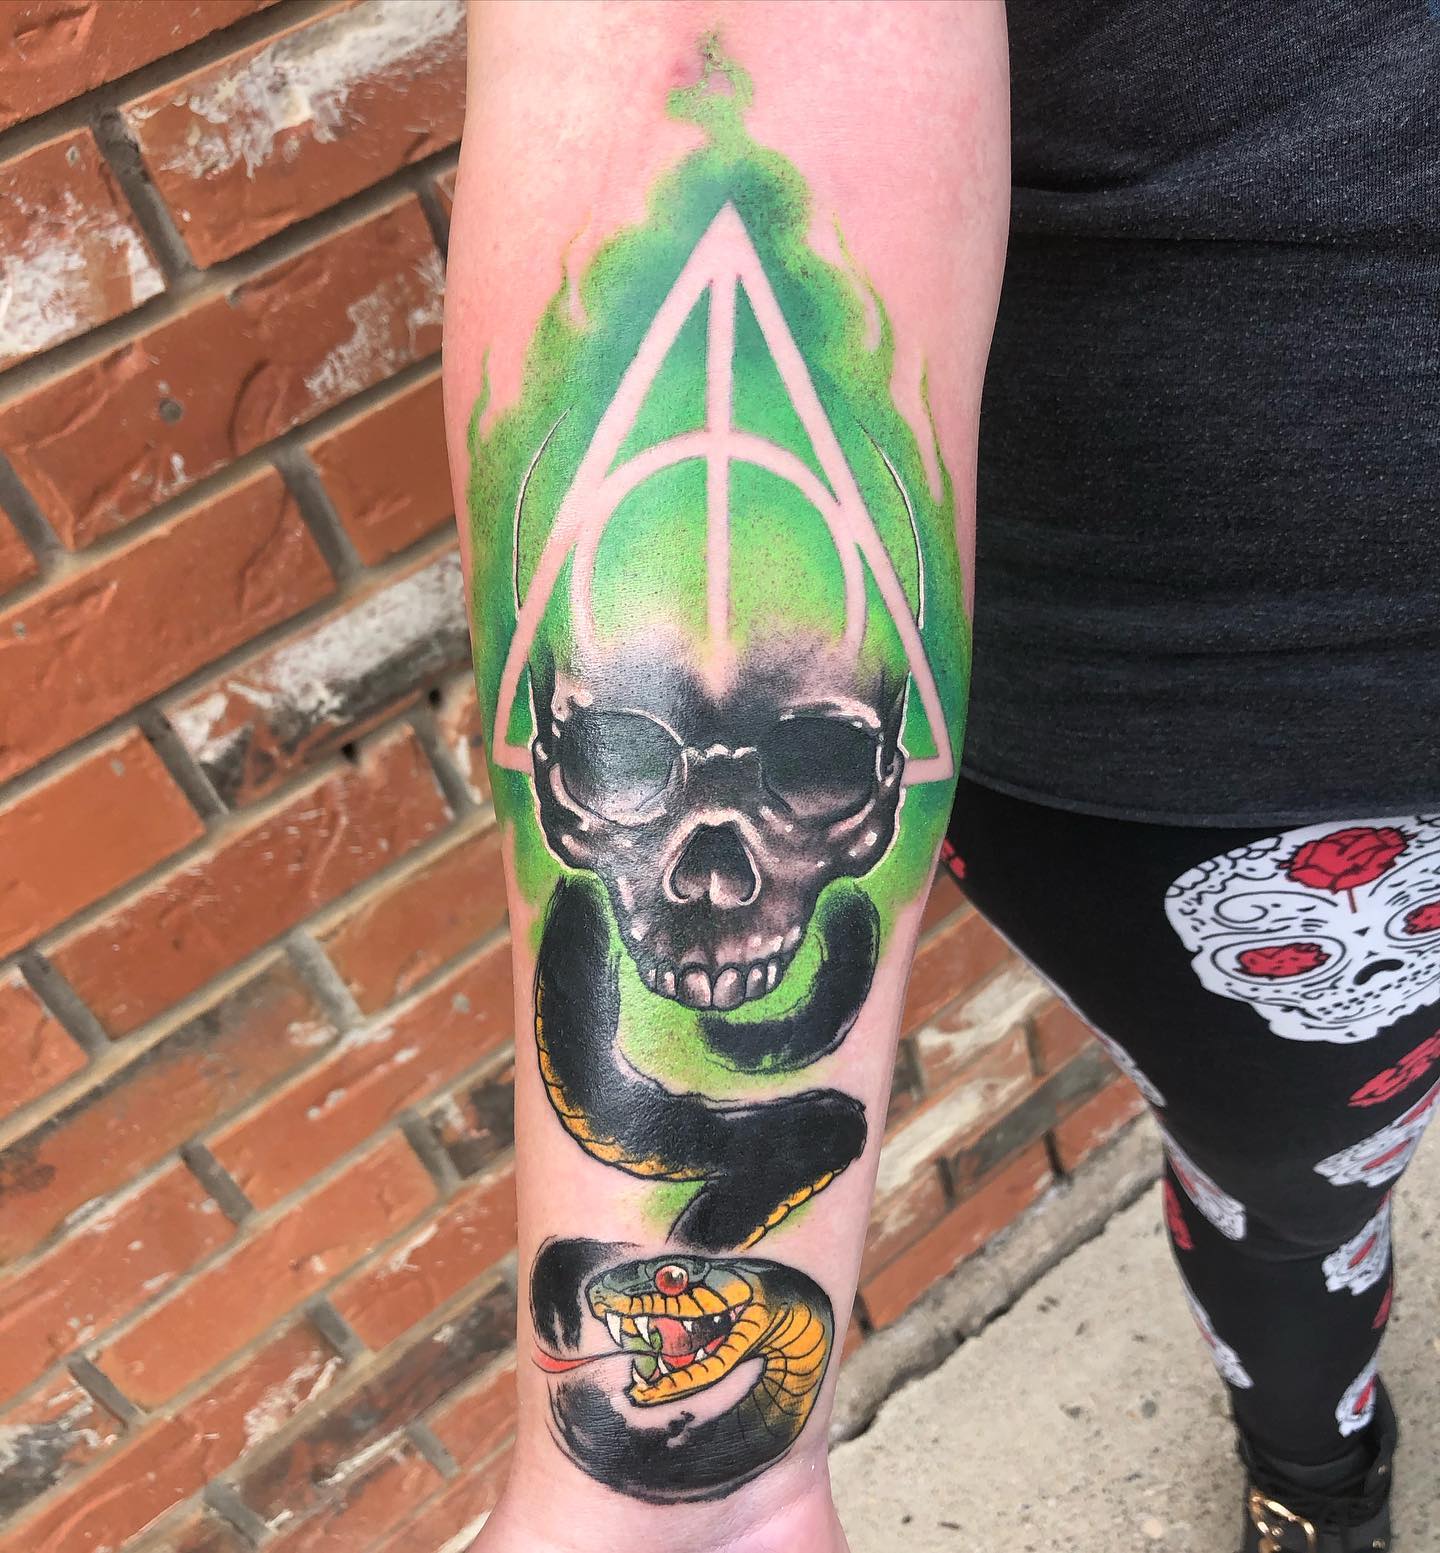 The design above differs from other ones because the highlight is deathly hallow sign behind the skull which is done in a great way. Go and get this scary tattoo.